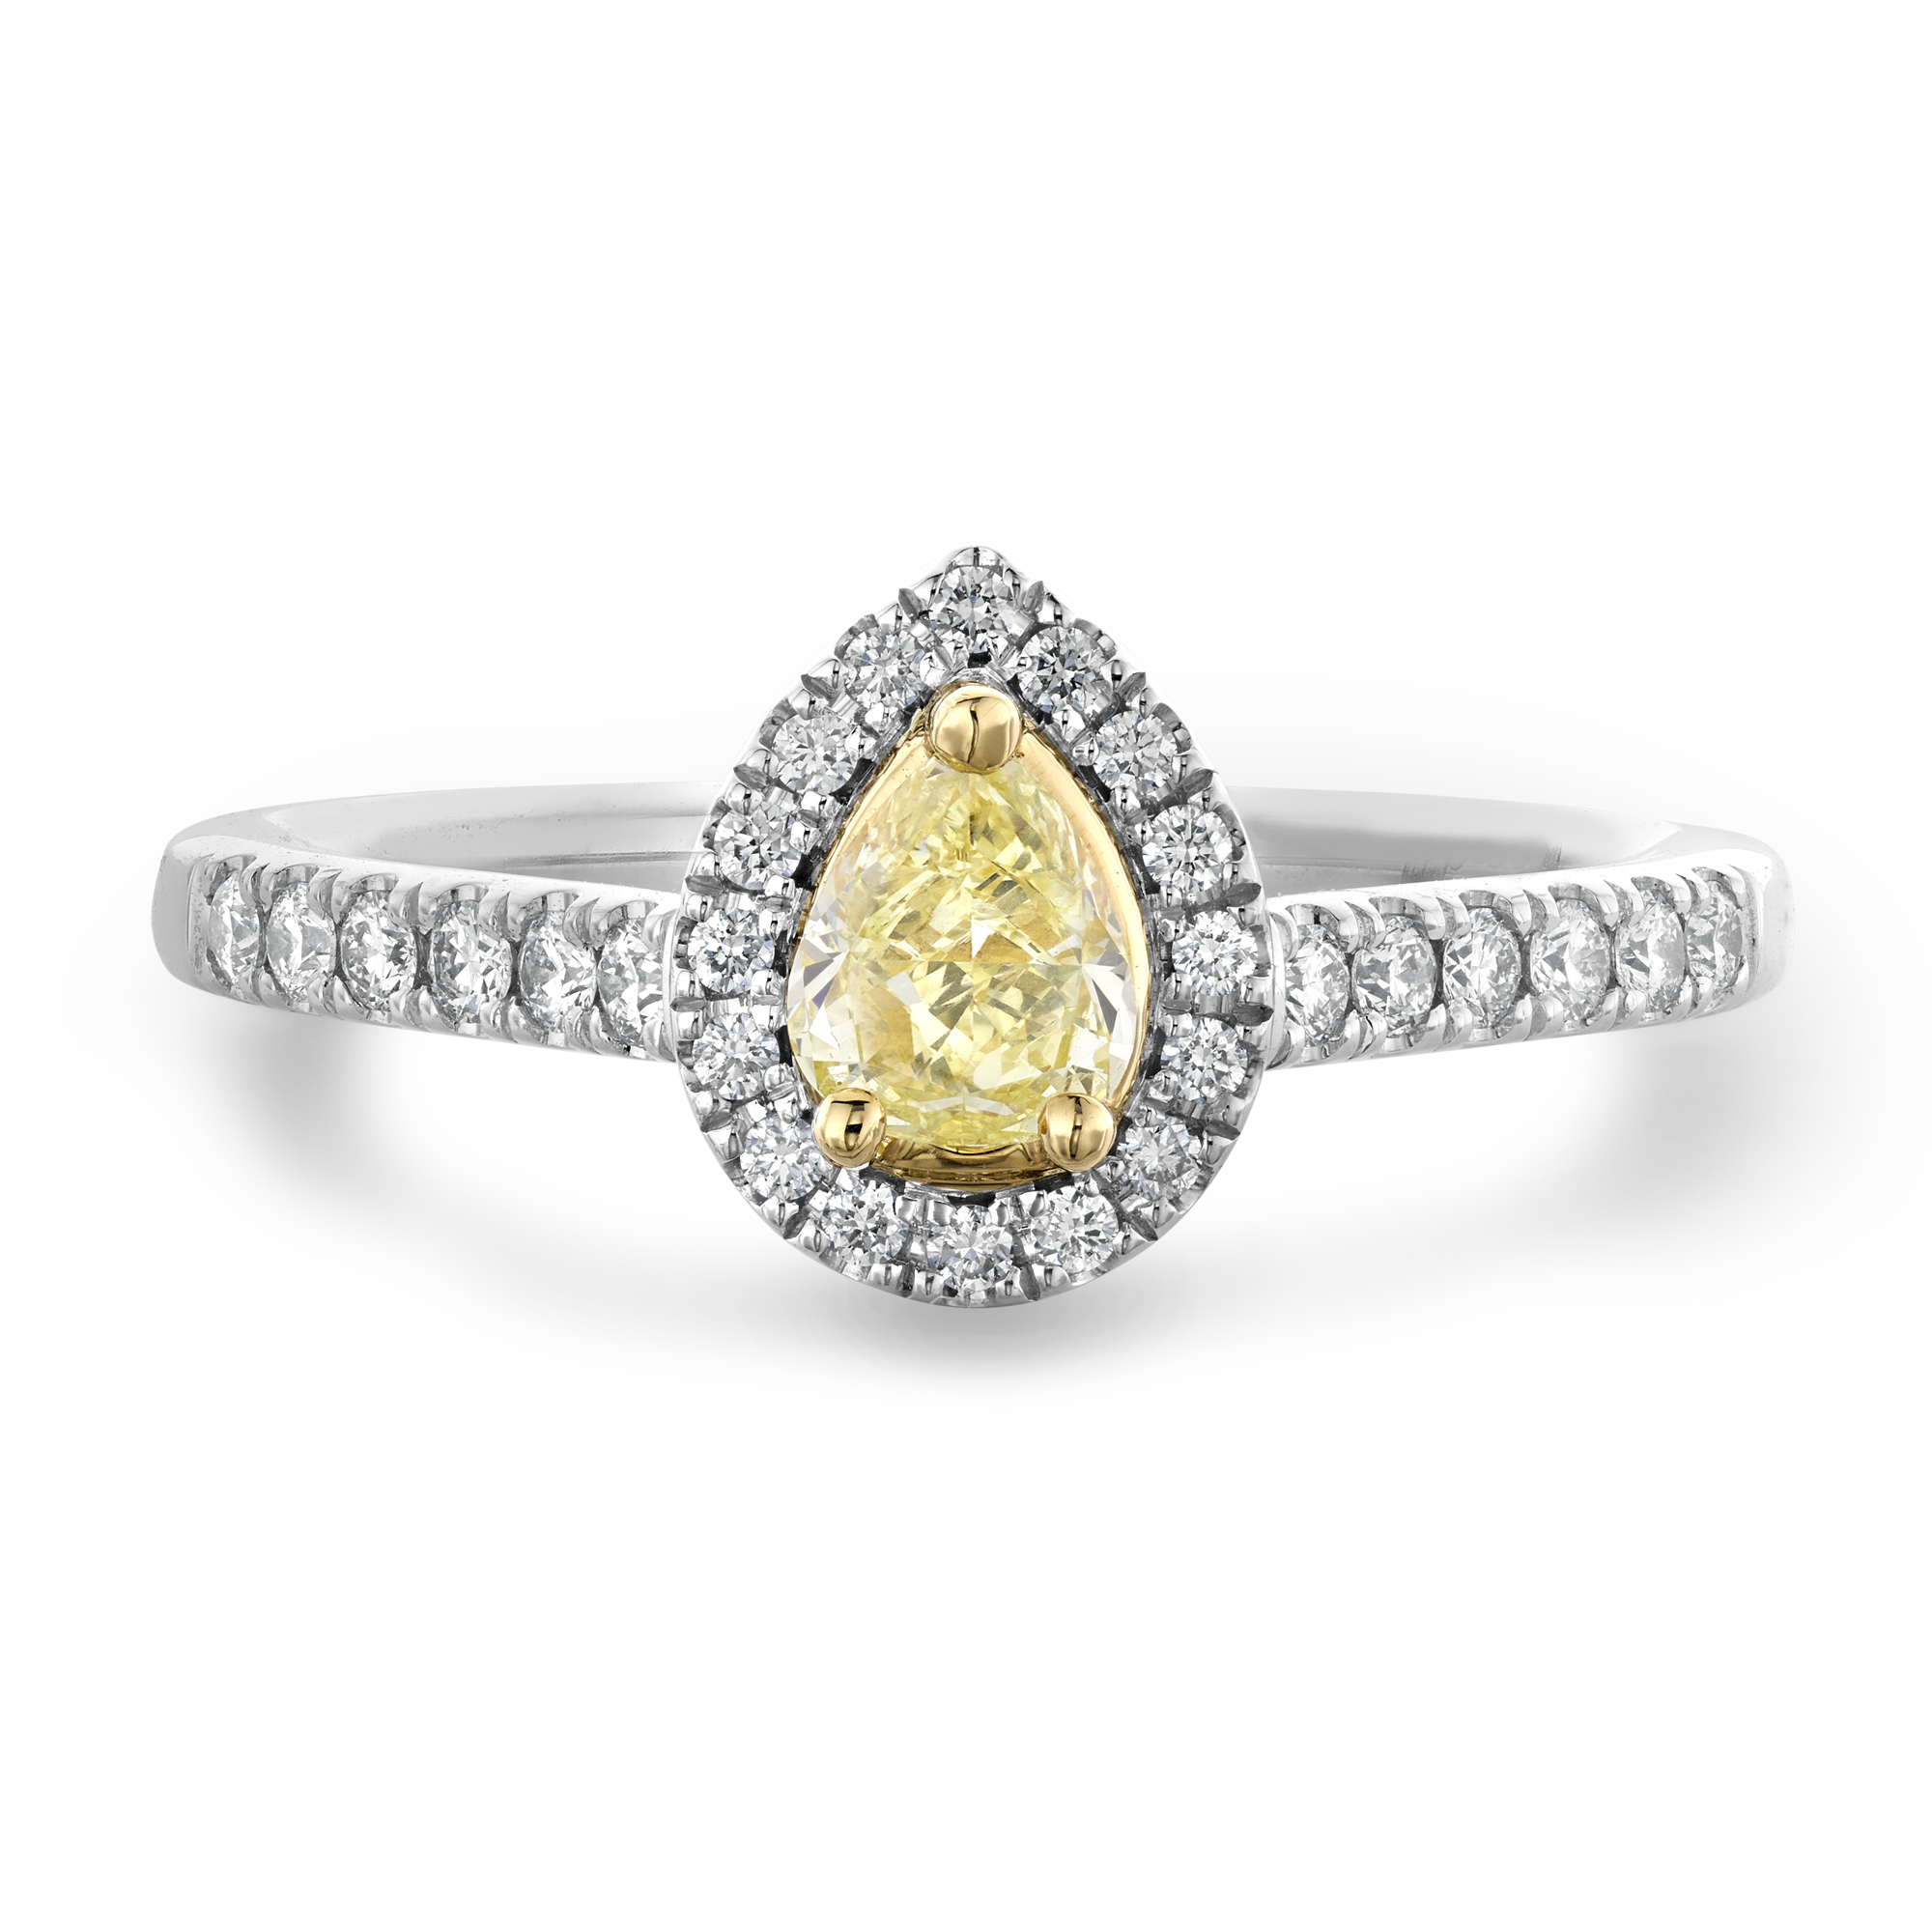 Celestial 0.36ct Fancy Light Yellow-Green Diamond Cluster Ring Pear & Brilliant Cut, Claw Set_2